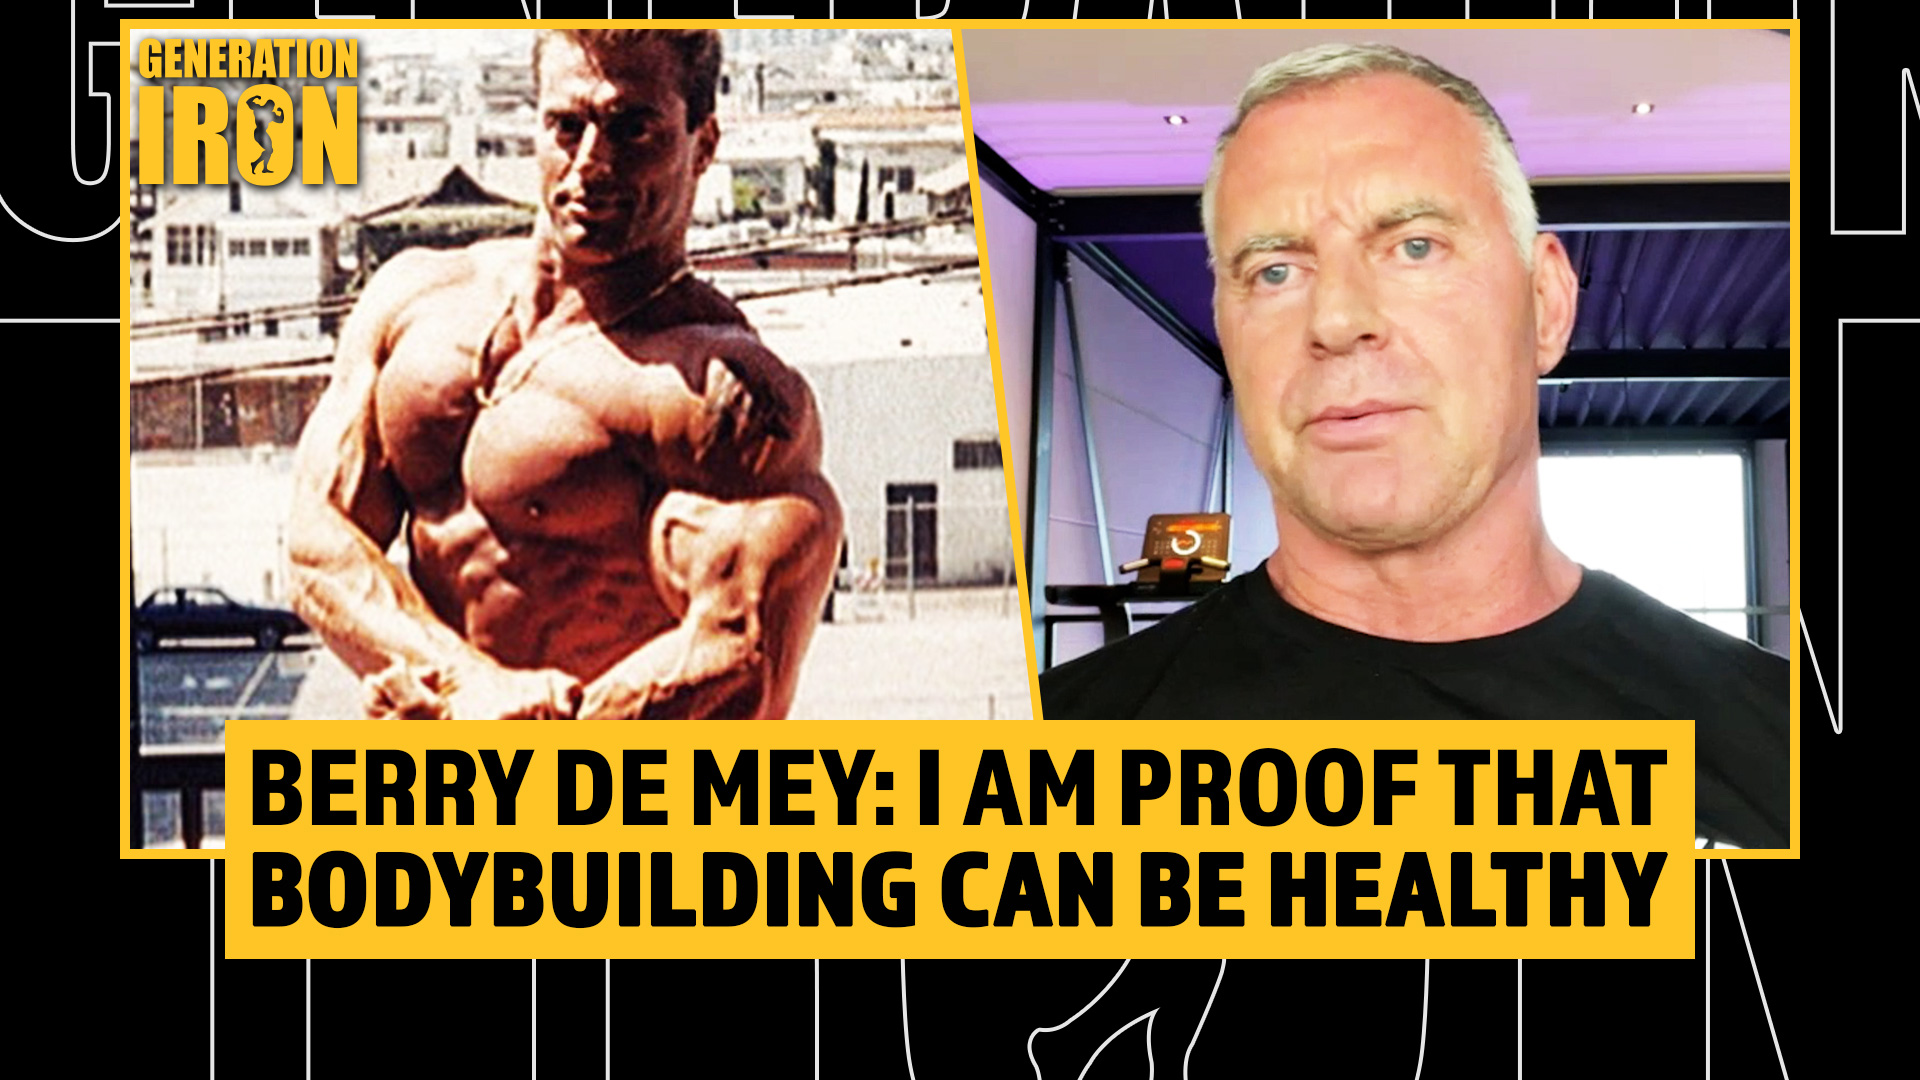 Berry De Mey: “I’m A Living Example That Bodybuilding Can Be Really Healthy”